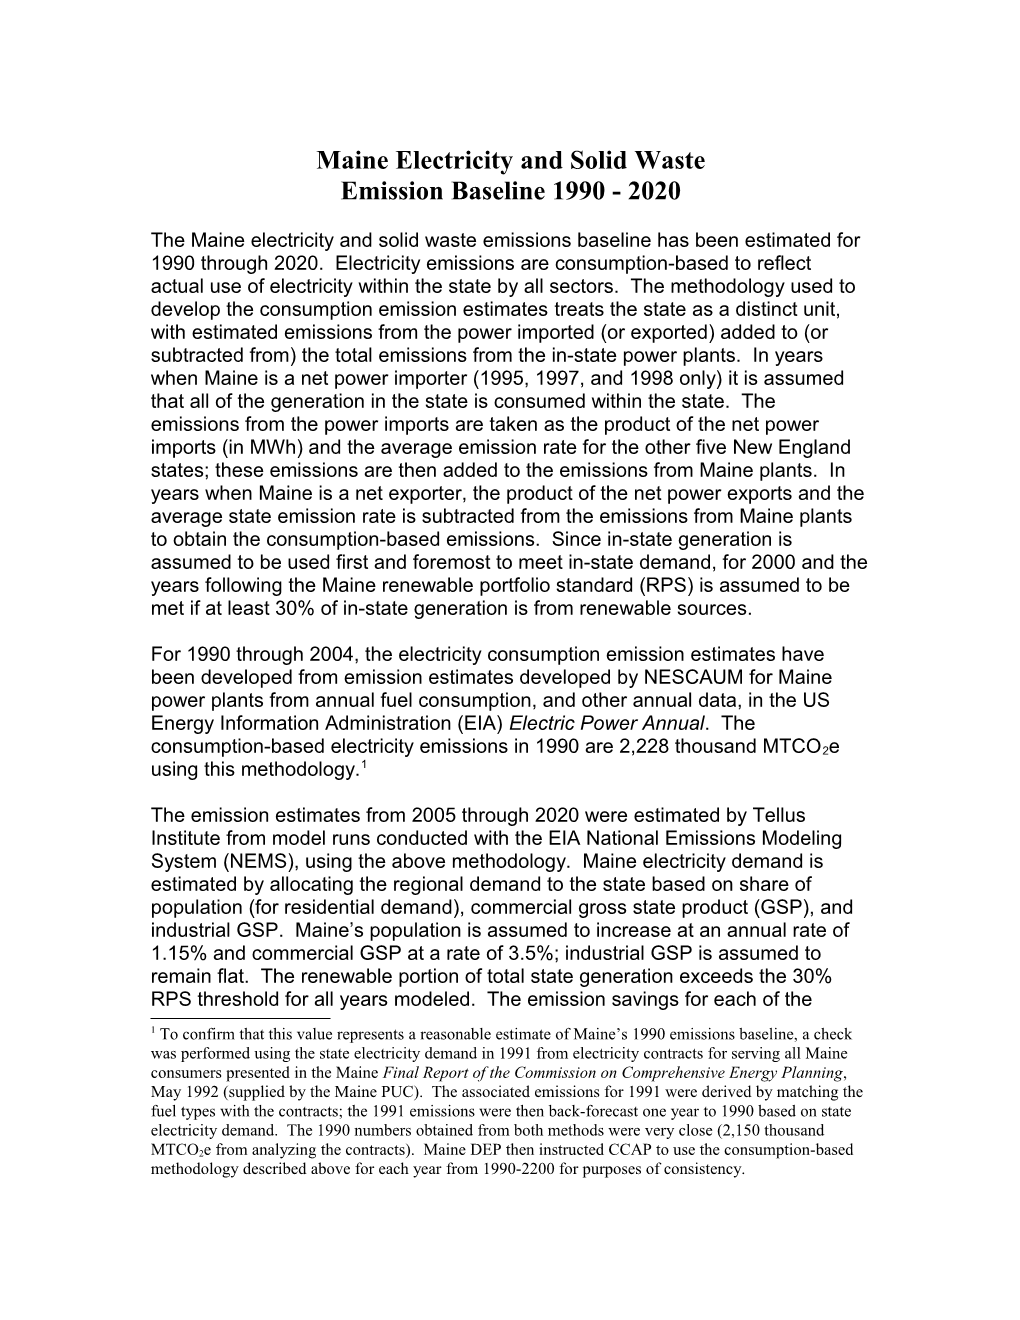 Maine Emission Baseline and Estimated Reductions